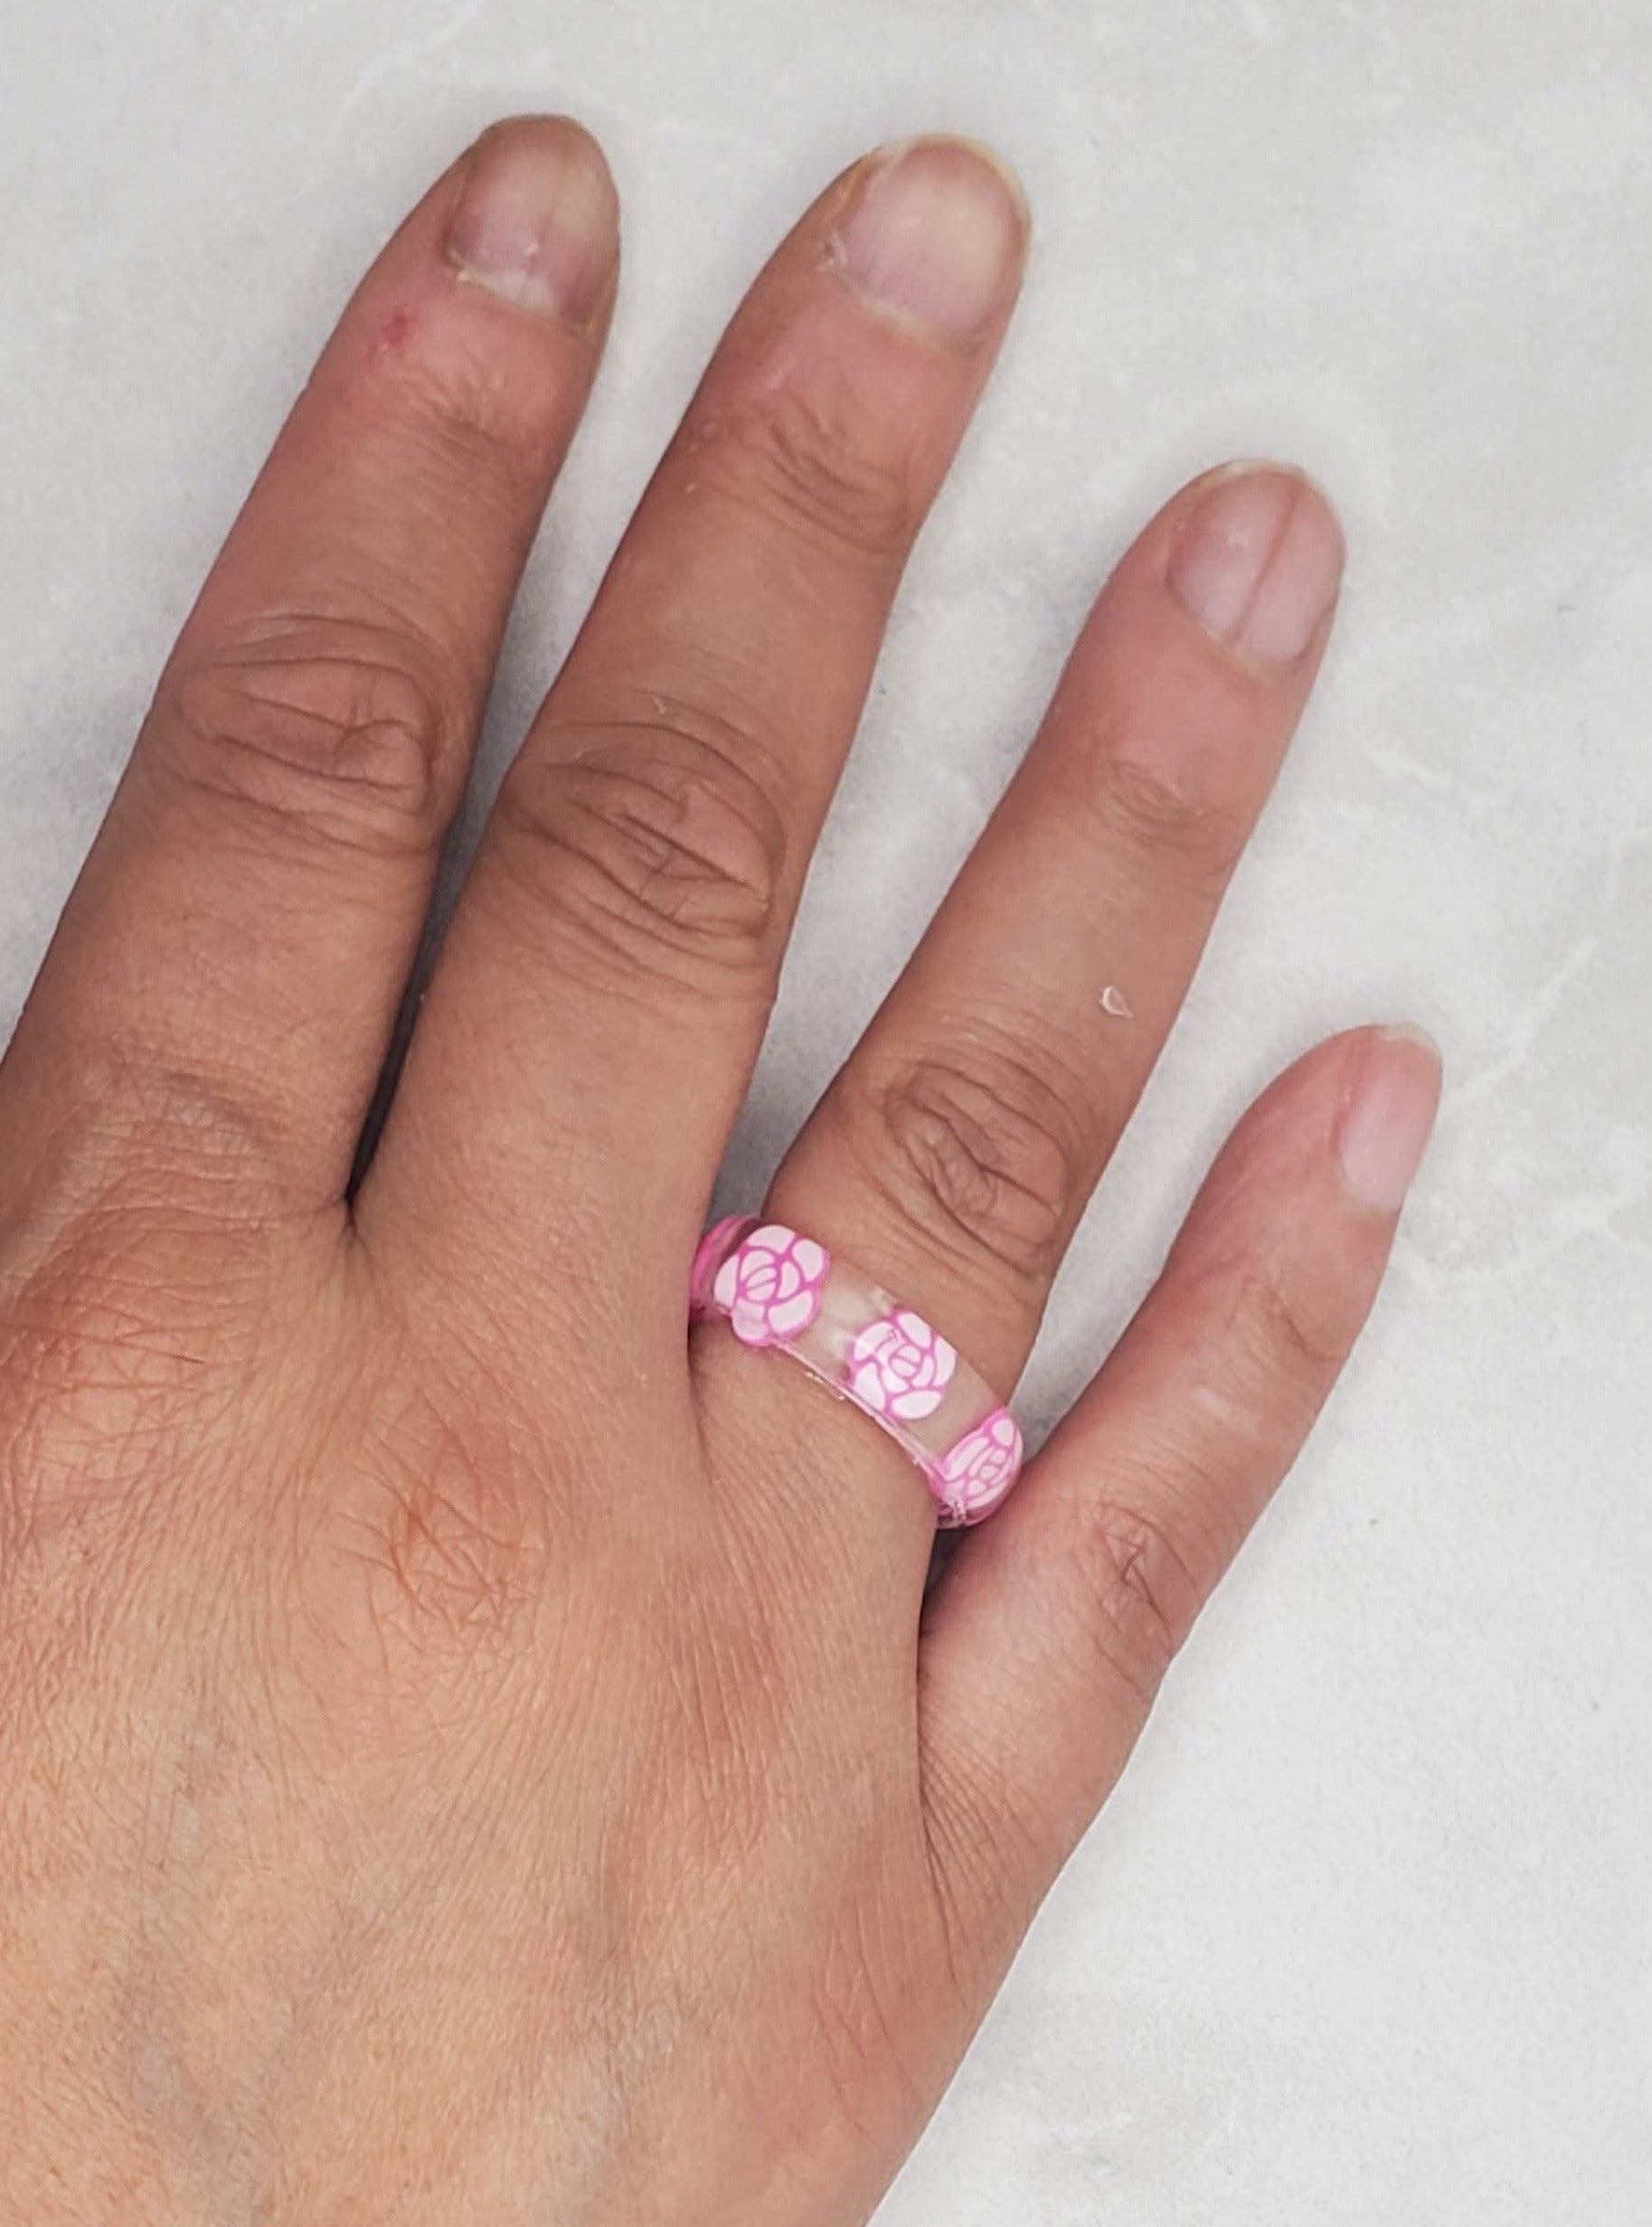 Rose resin ring on a woman's hand - braceliss